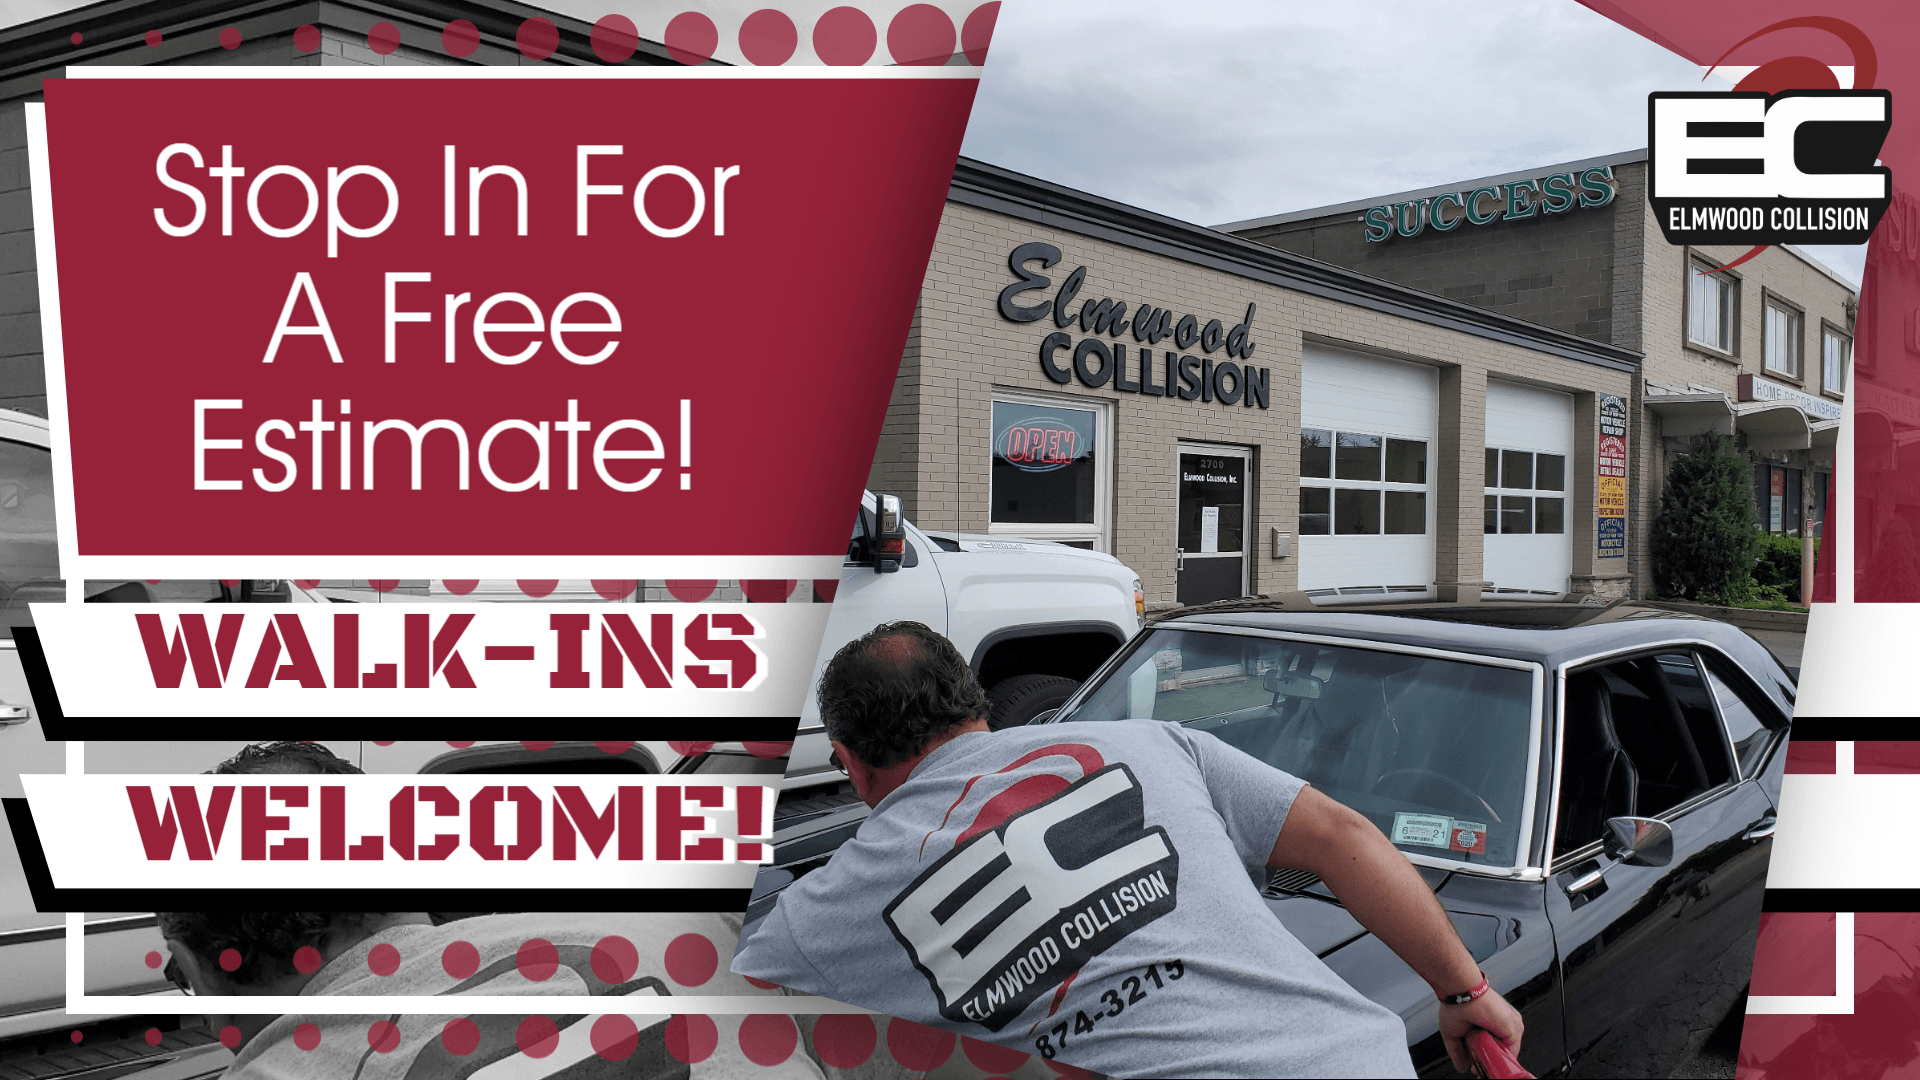 Walk-Ins Welcome at Elmwood Collision!